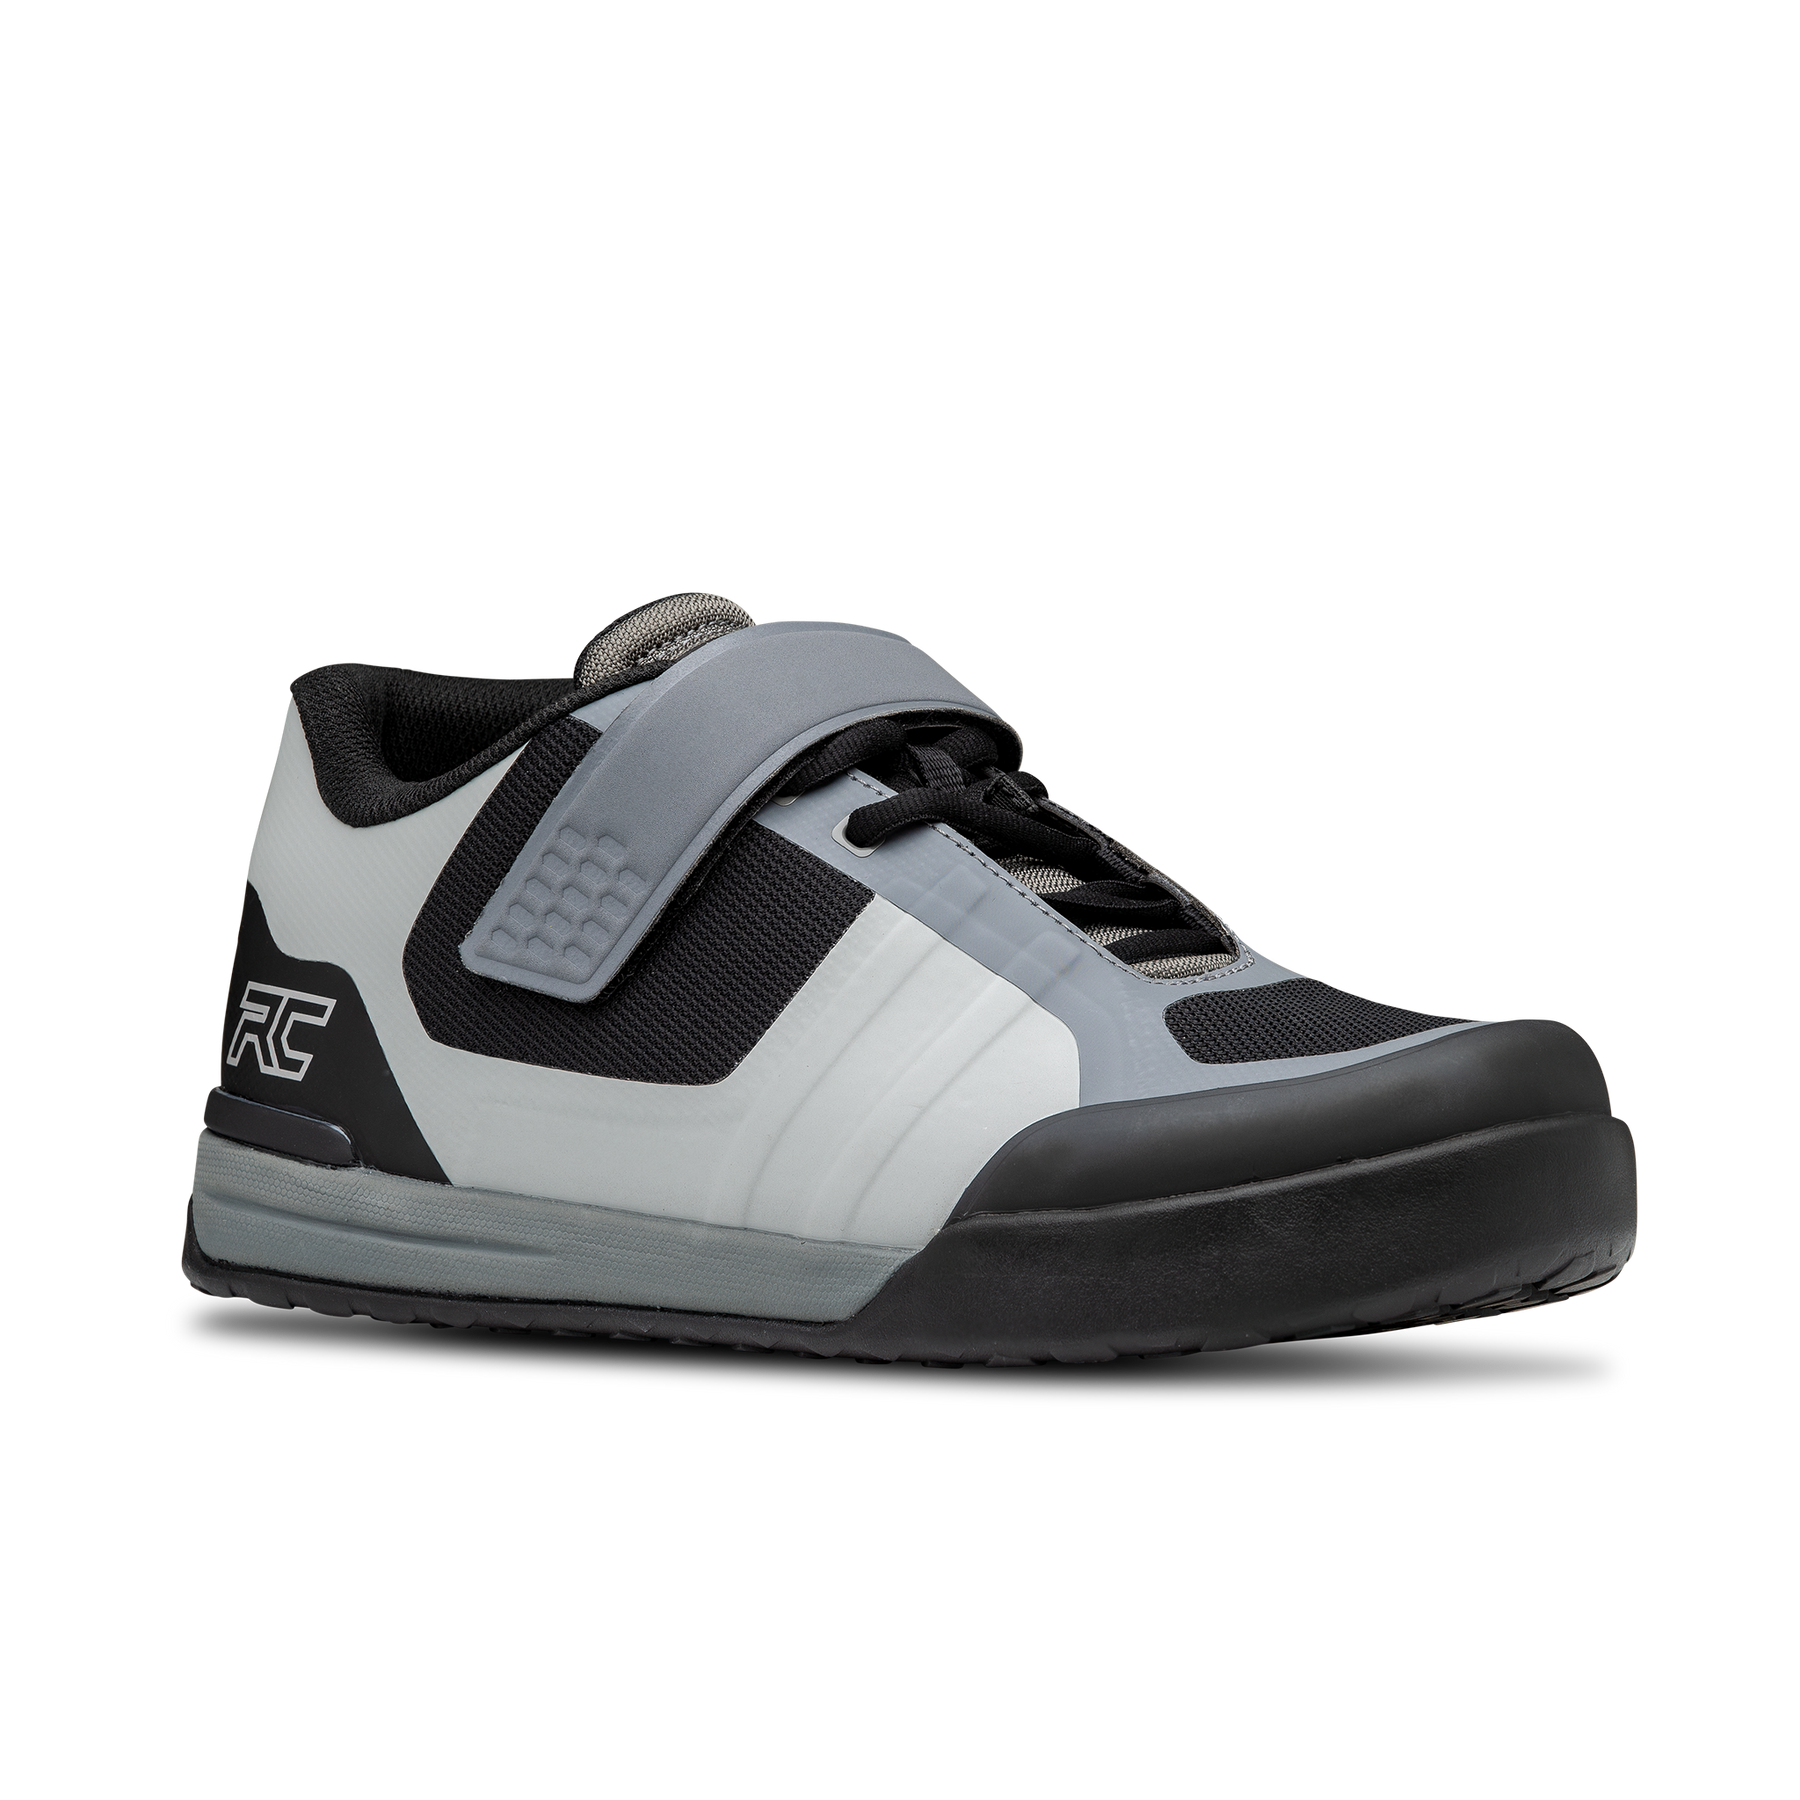 Ride Concepts Transition Spd Shoes - US 9.5 - Charcoal - Grey - Image 1